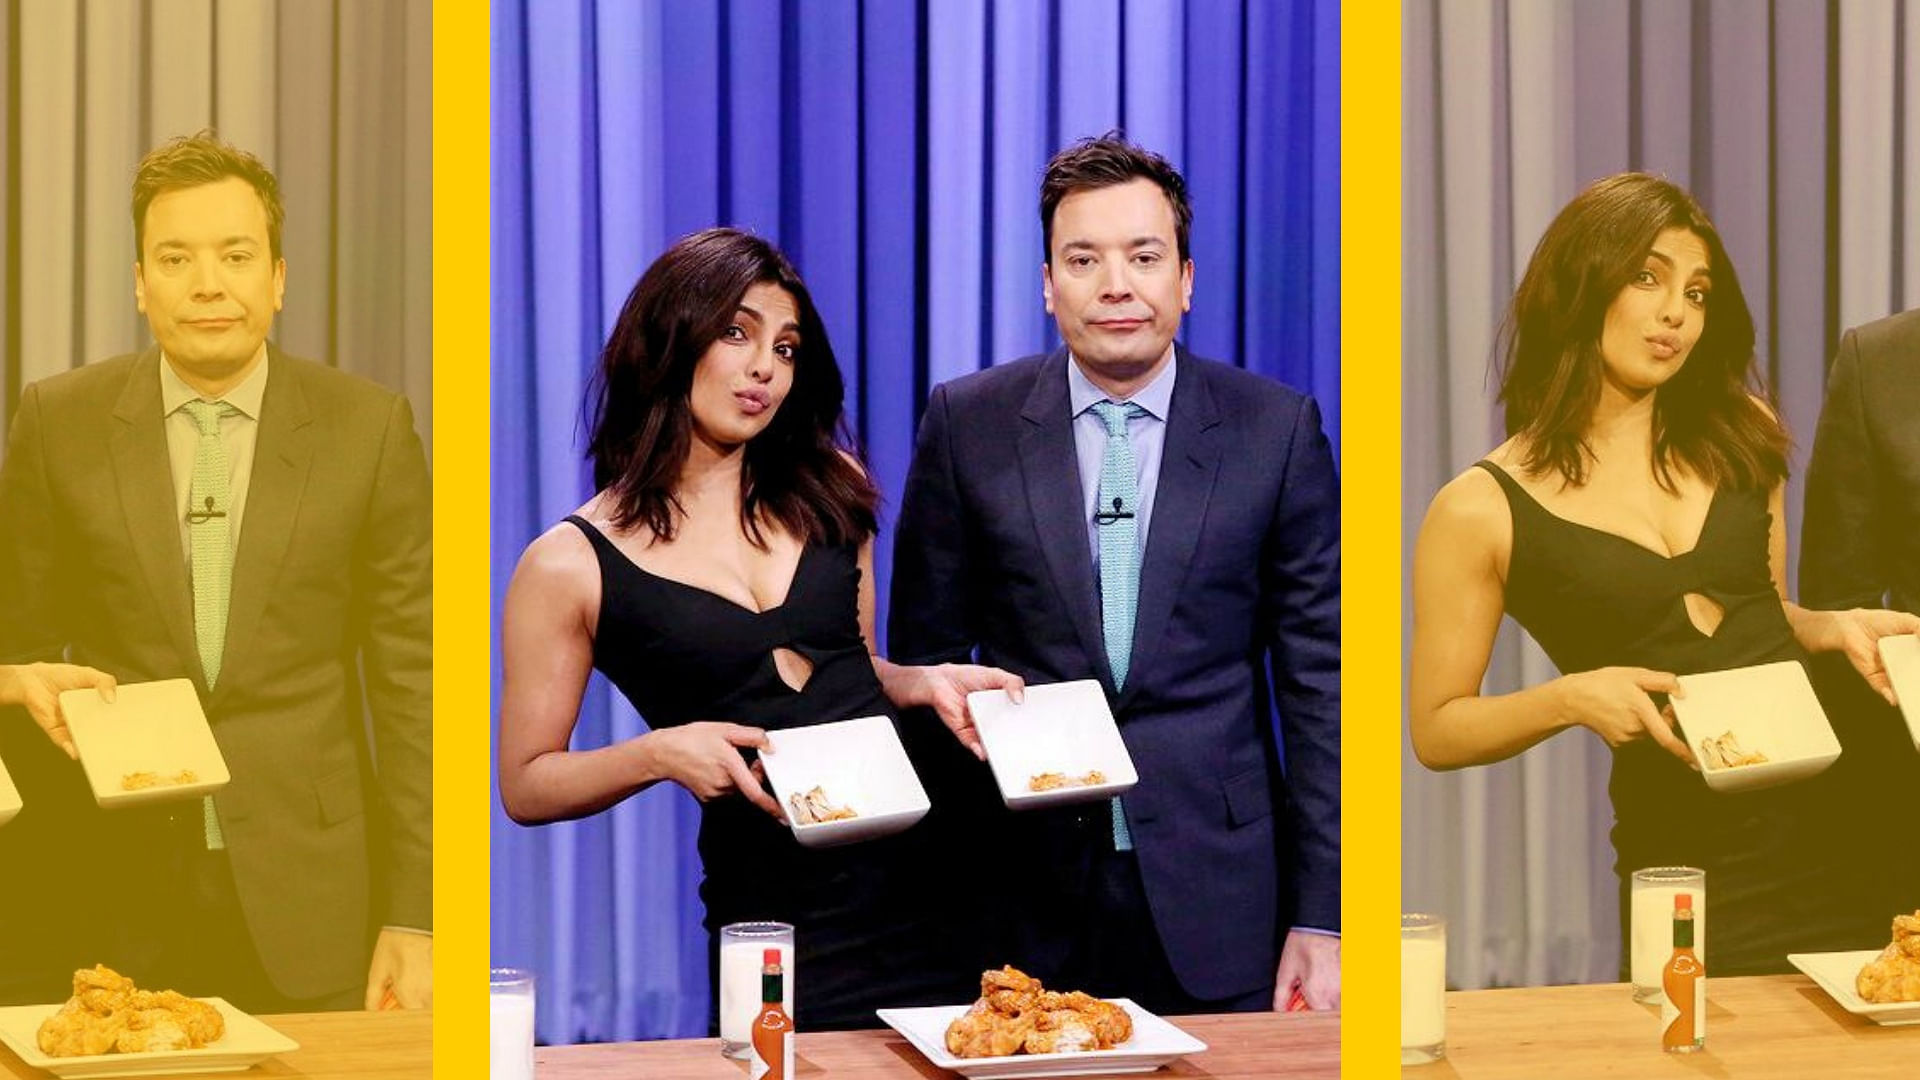 Desi girl Priyanka Chopra is his first Indian guest on The Tonight Show. 